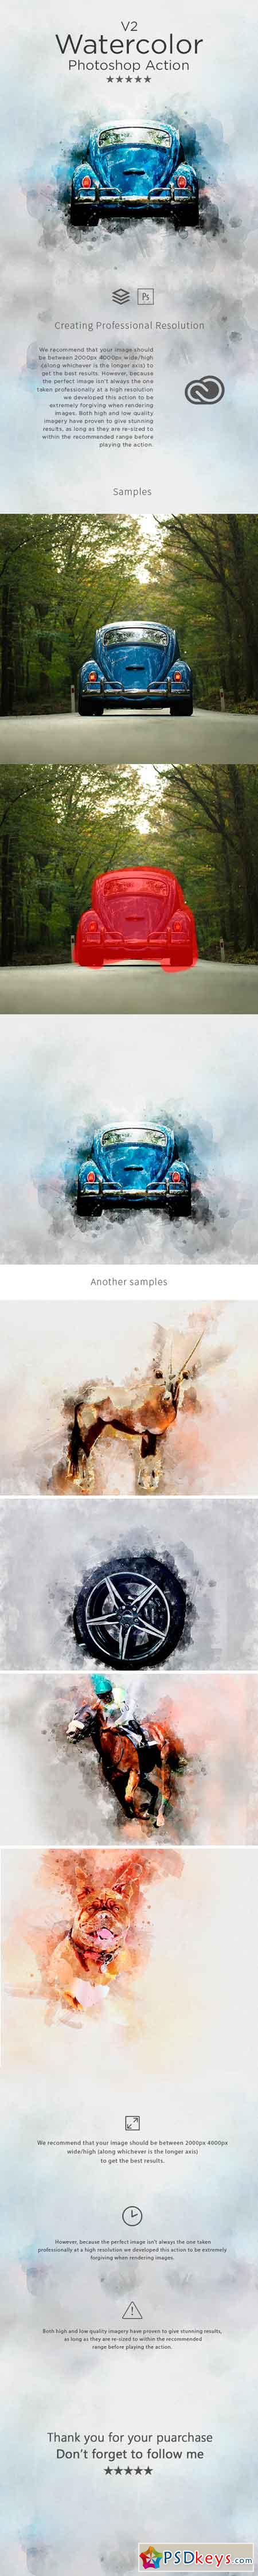 Watercolor V.2 Photoshop Action 20682494